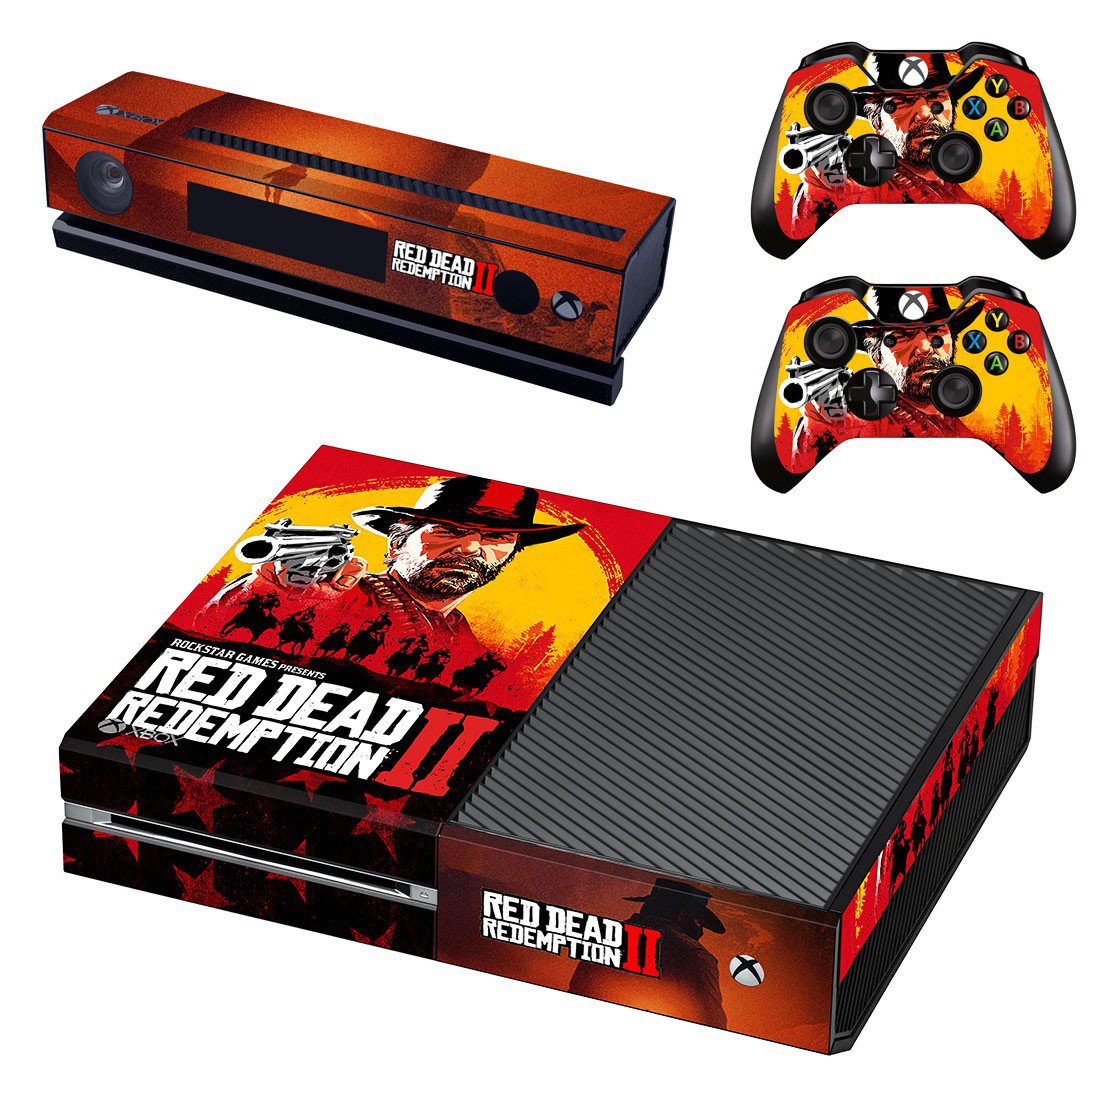 Xbox One Skin Cover - Red Dead Redemption 2